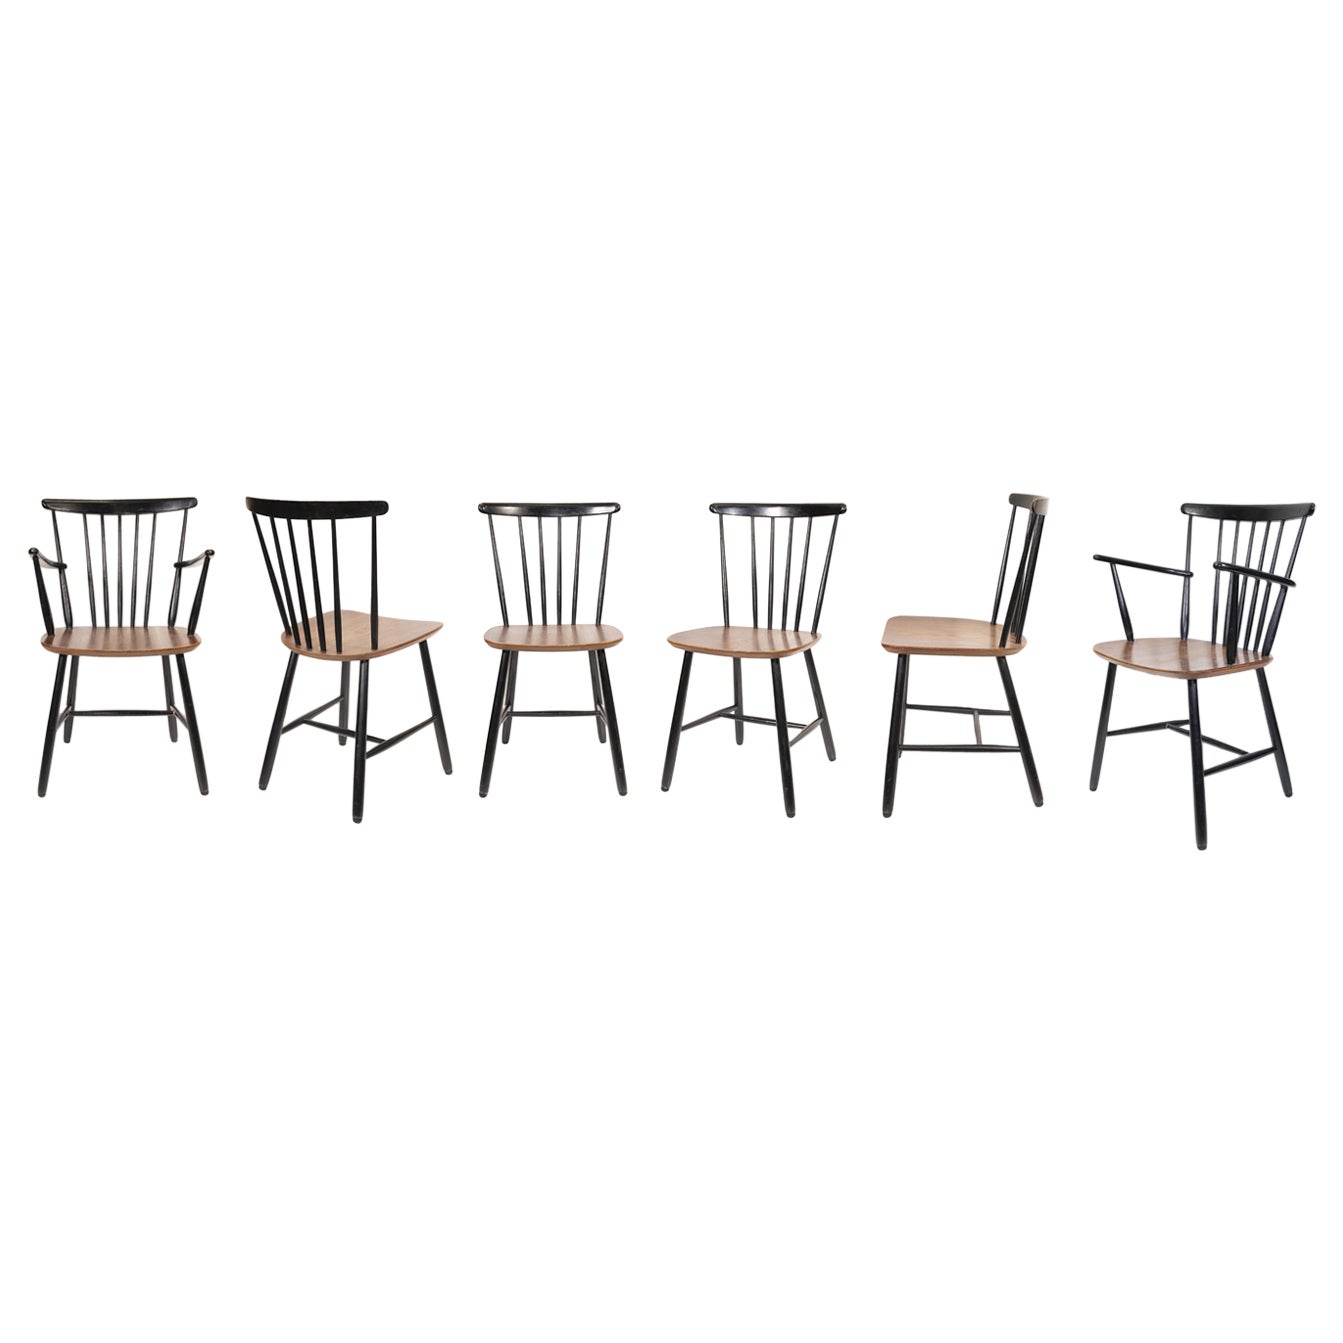 Set of 6 Fanett Dining Chairs by Ilmari Tapiovaara, 1949 For Sale